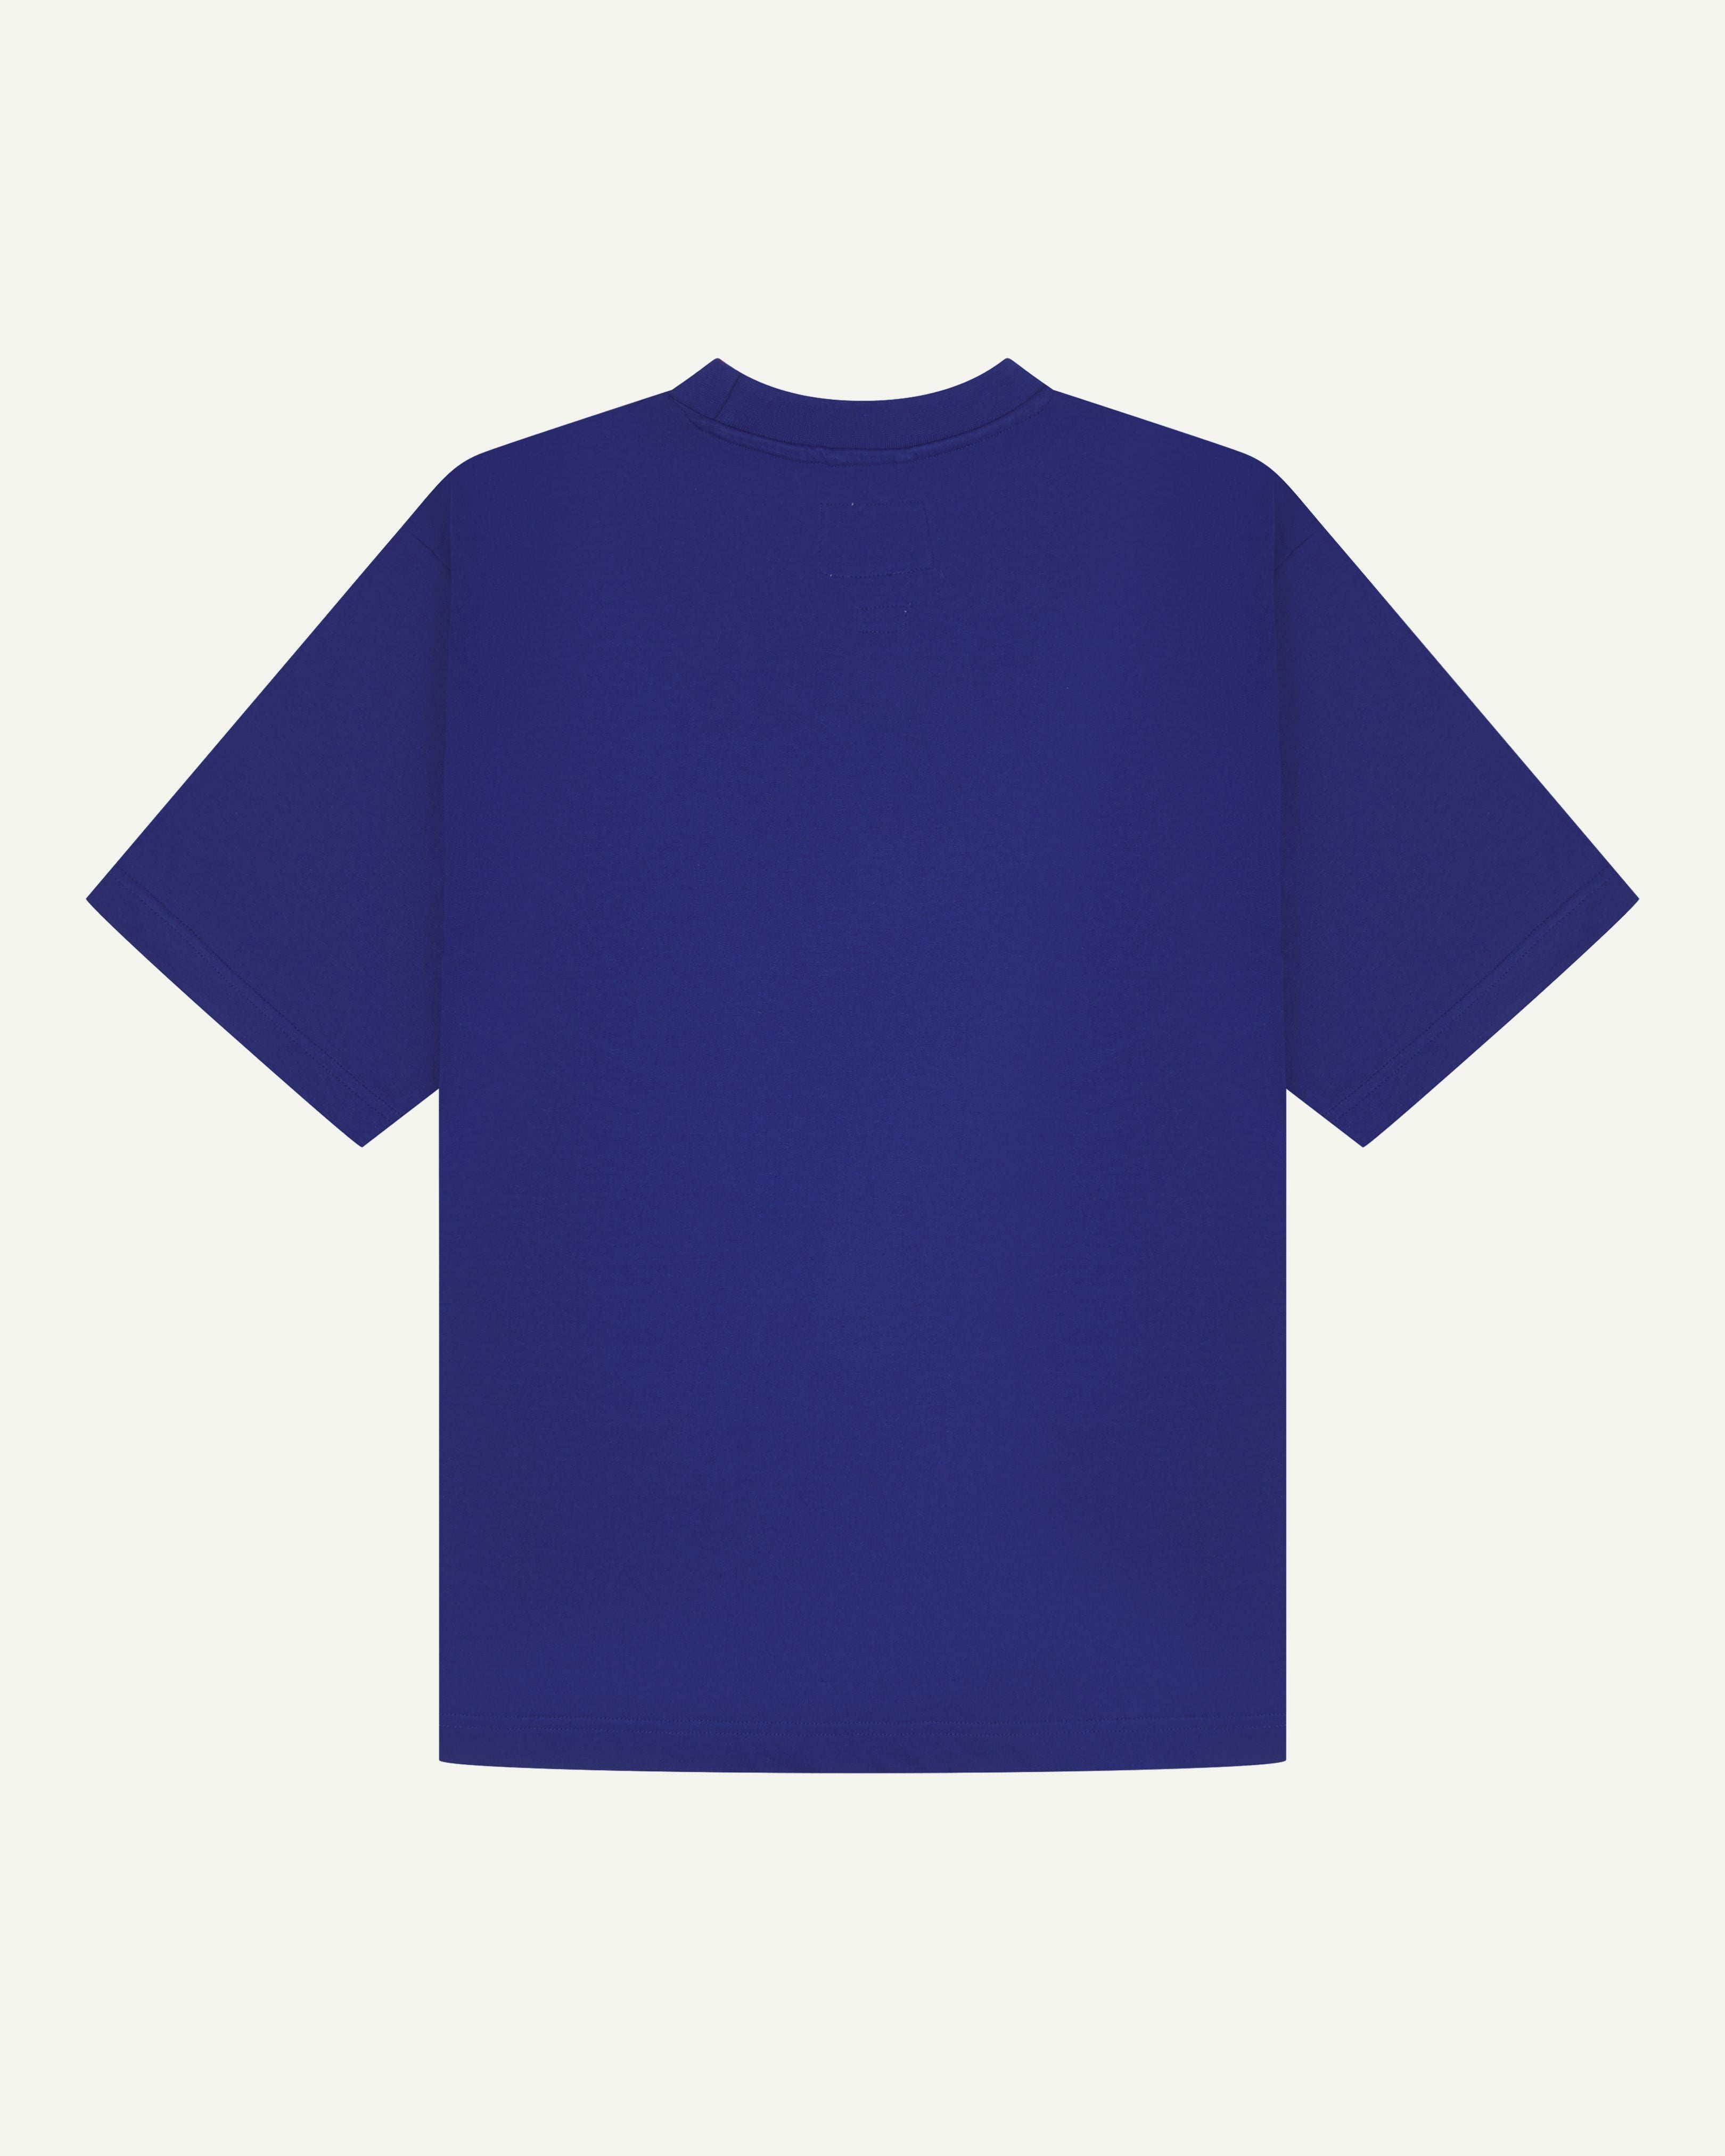 Back flat view of ultra blue organic cotton #7008 oversized T-shirt by Uskees against white background.